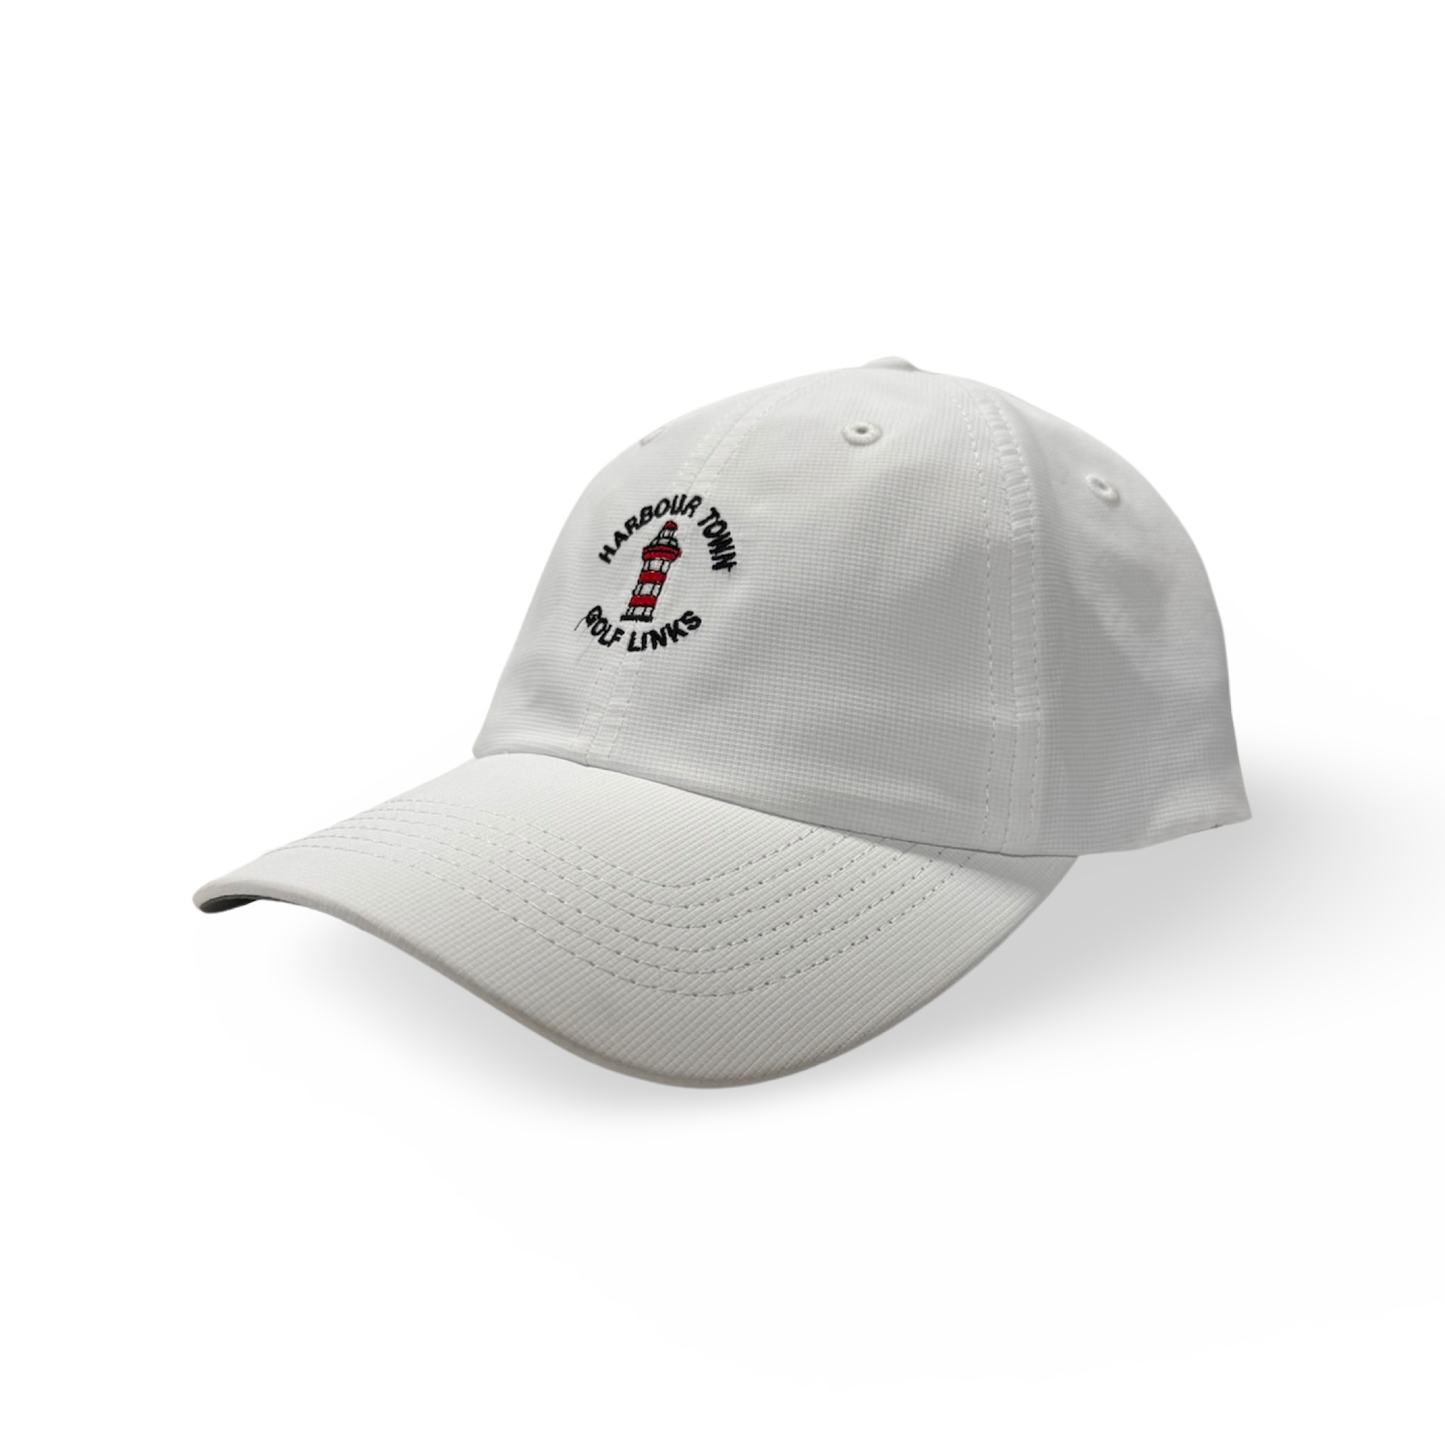 Imperial Lighthouse Cap - White